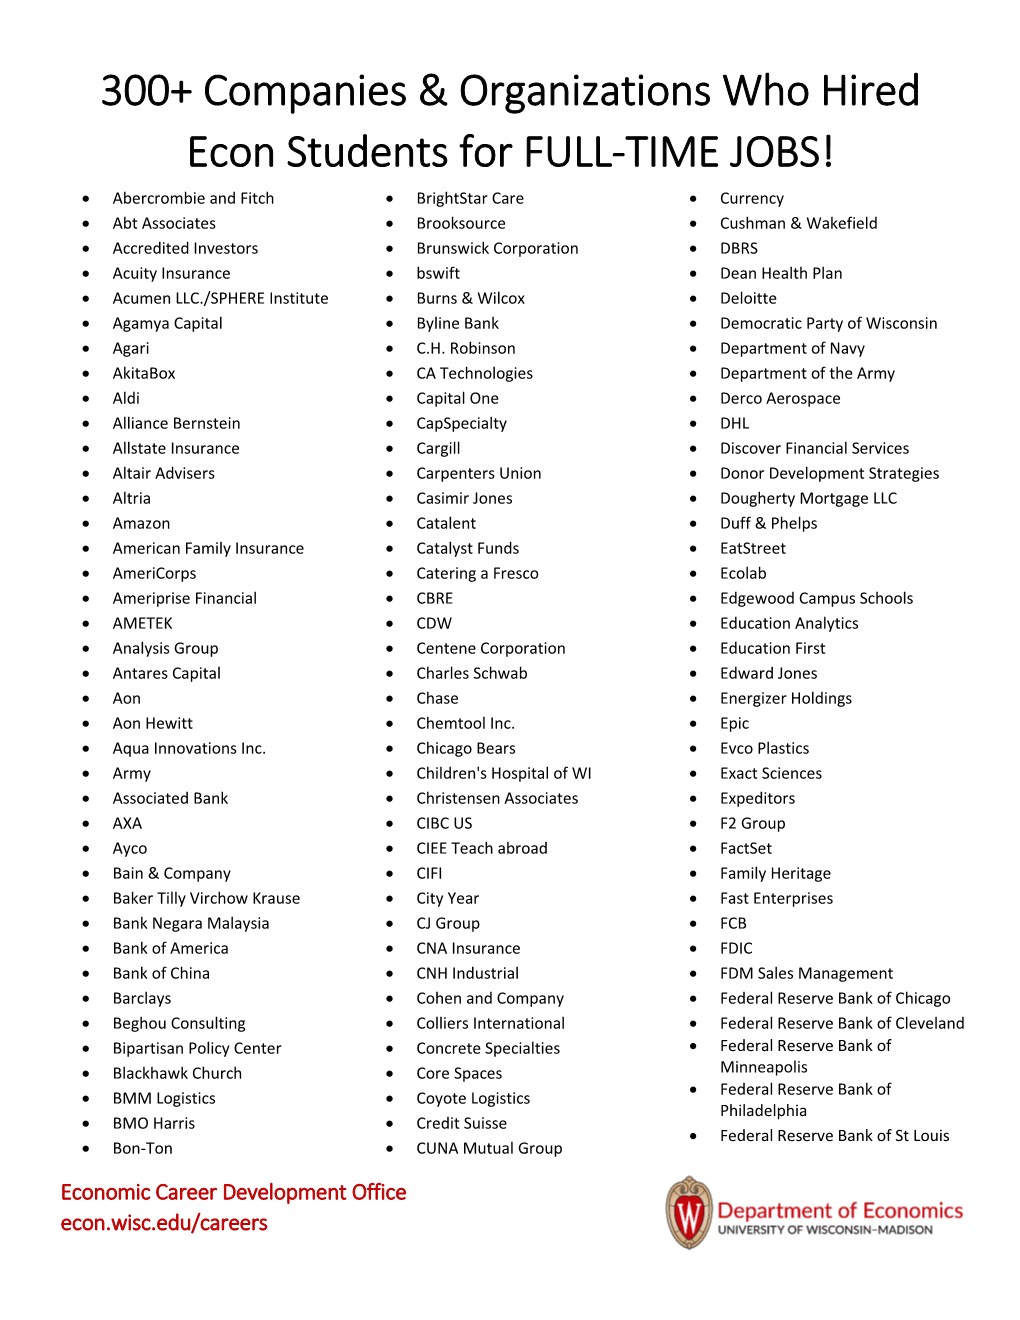 300+ Companies & Organizations Who Hired Econ Students for FULL